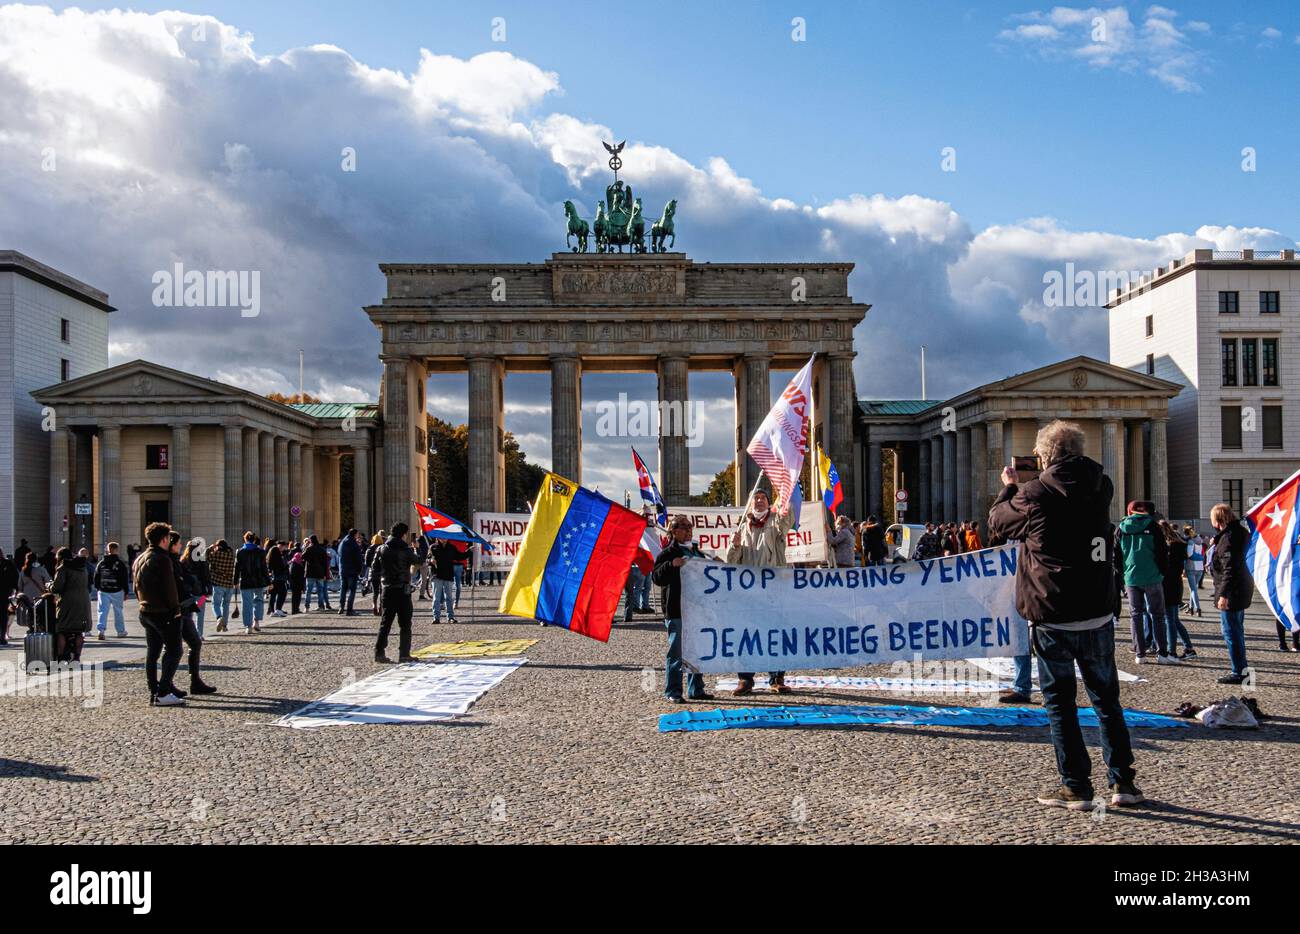 Demonstration - People protesting about bombing in Yemen in front of the  Brandenburg Gate,Mitte,Berlin Stock Photo - Alamy